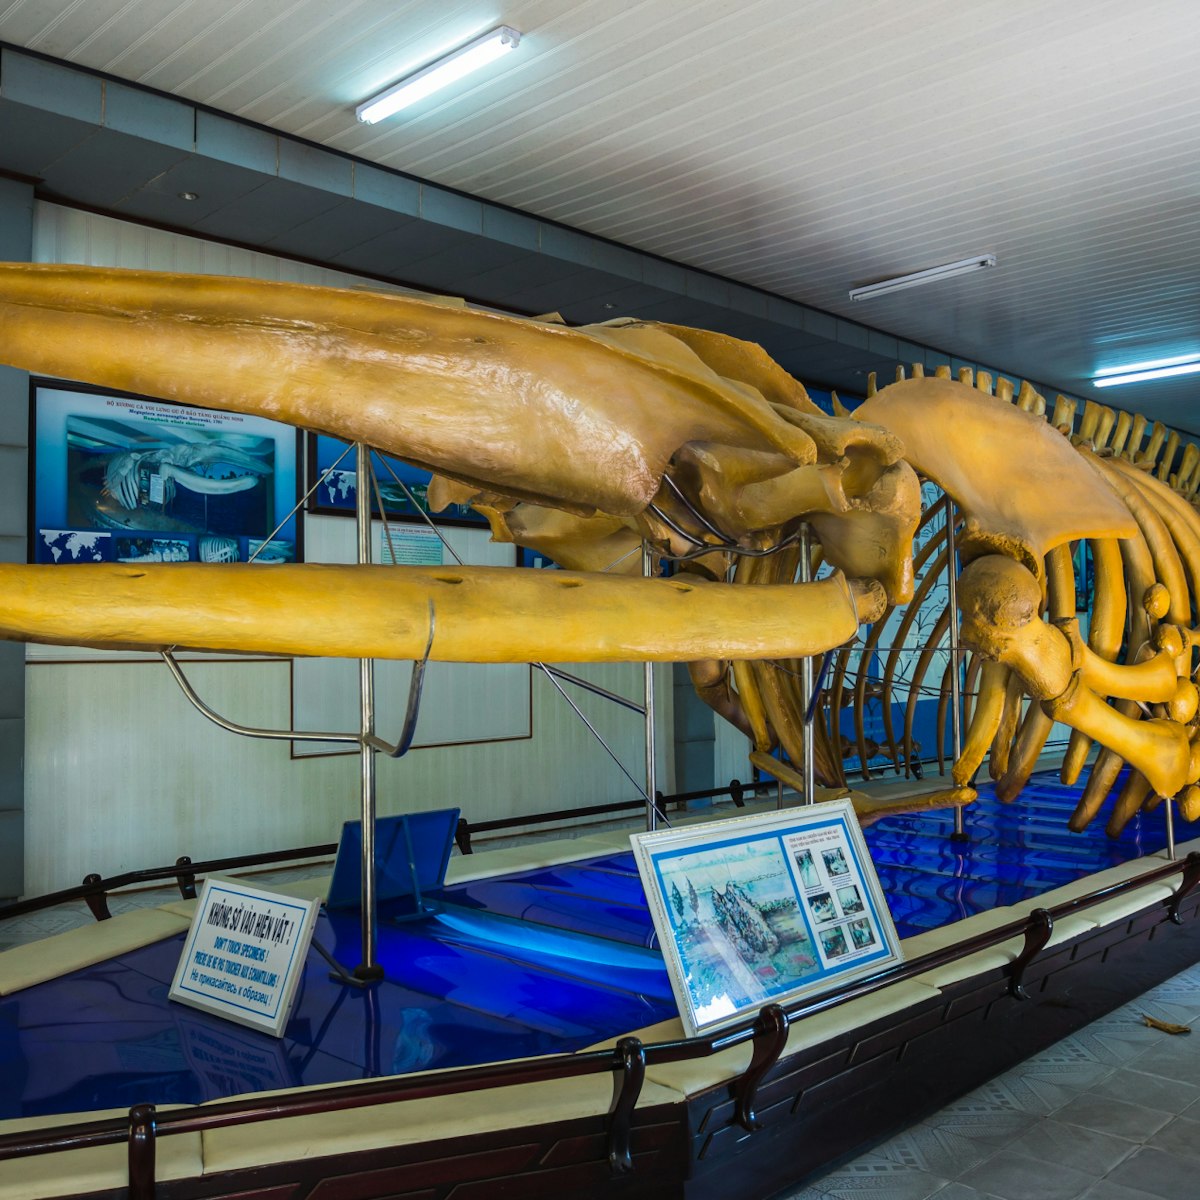 Vietnam Nha Trang, 23 November 2014; Whale skeleton in the National Oceanographic Museum ; Shutterstock ID 335284430; Your name (First / Last): Josh Vogel; GL account no.: 56530; Netsuite department name: Online Design; Full Product or Project name including edition: Digital Content/Sights